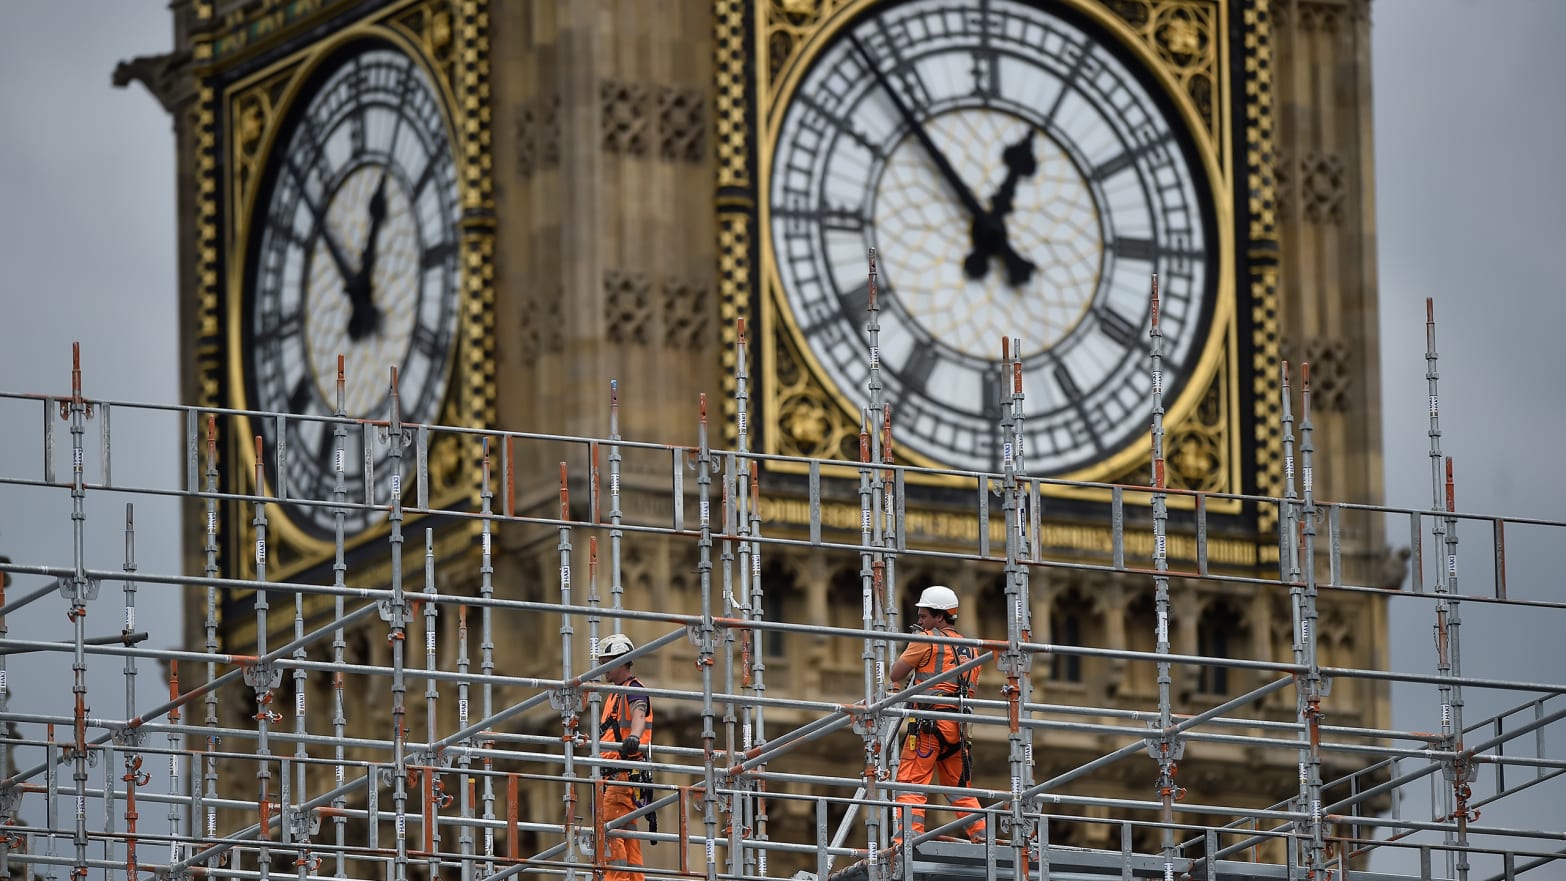 Construction work is carried out on the Elizabeth Tower, commonly known as Big Ben, in London.